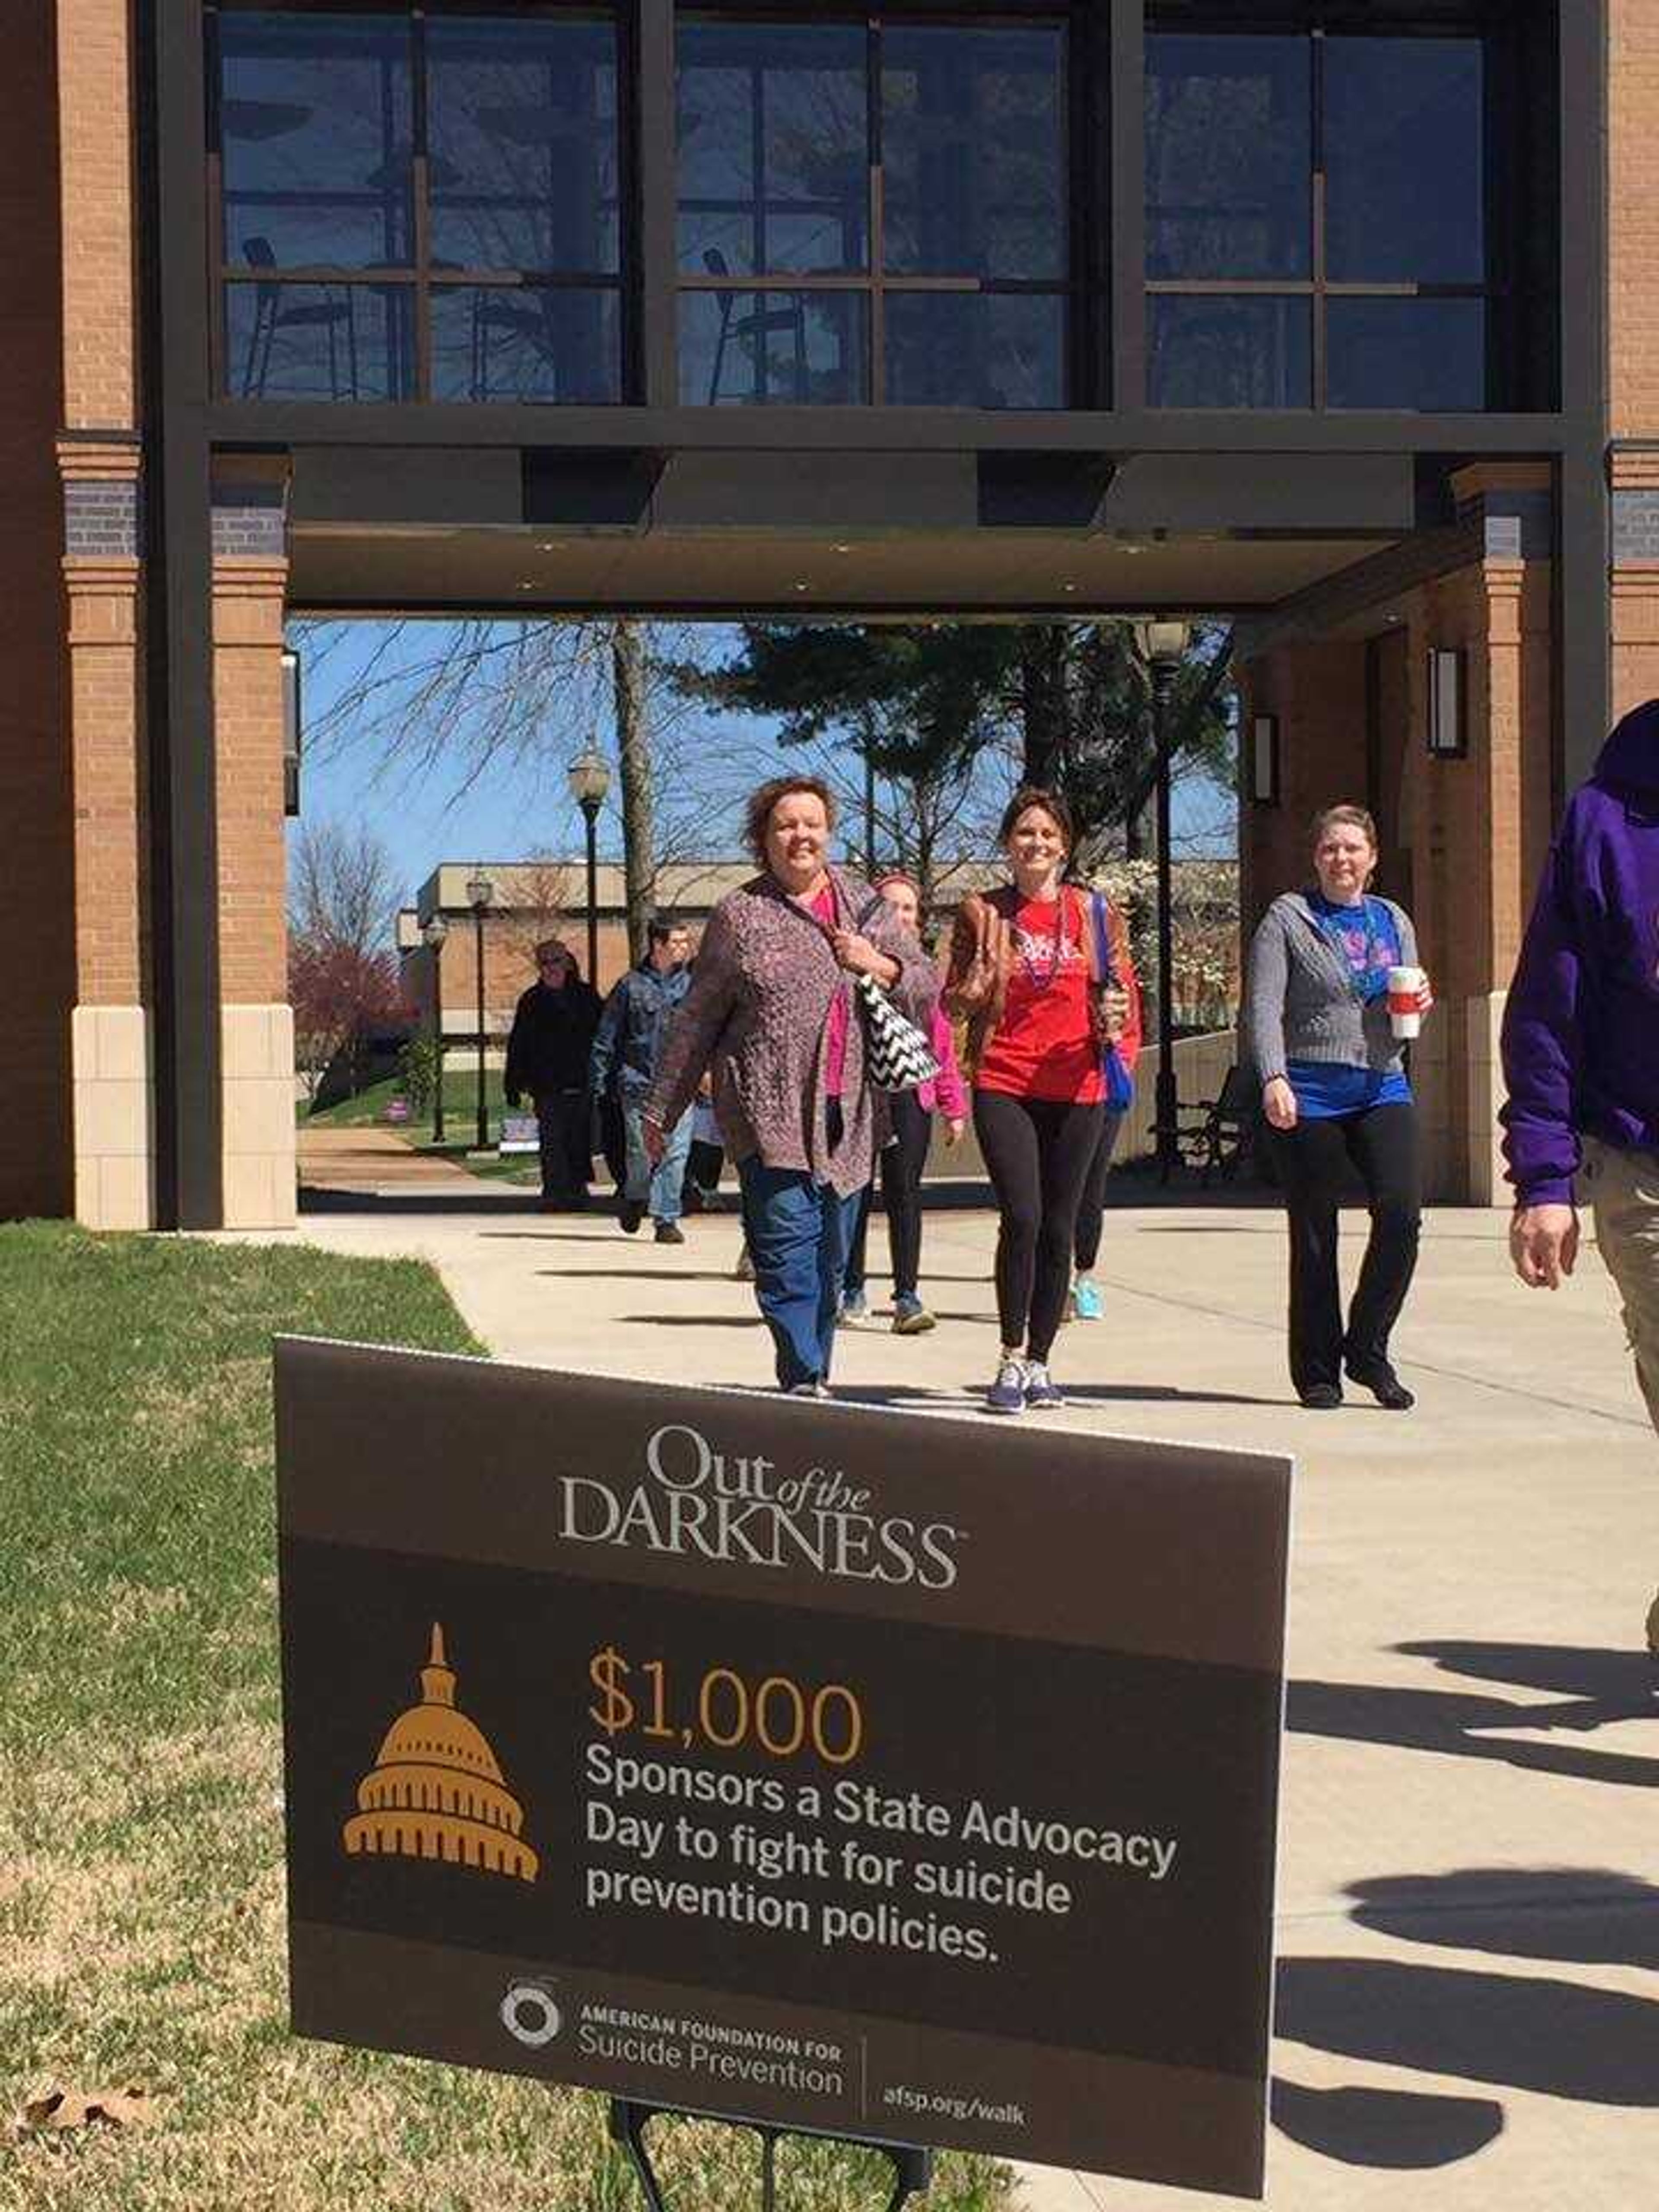 Supporters walk to raise awareness on suicide prevention during the Out of the Darkness community walk in 2015.